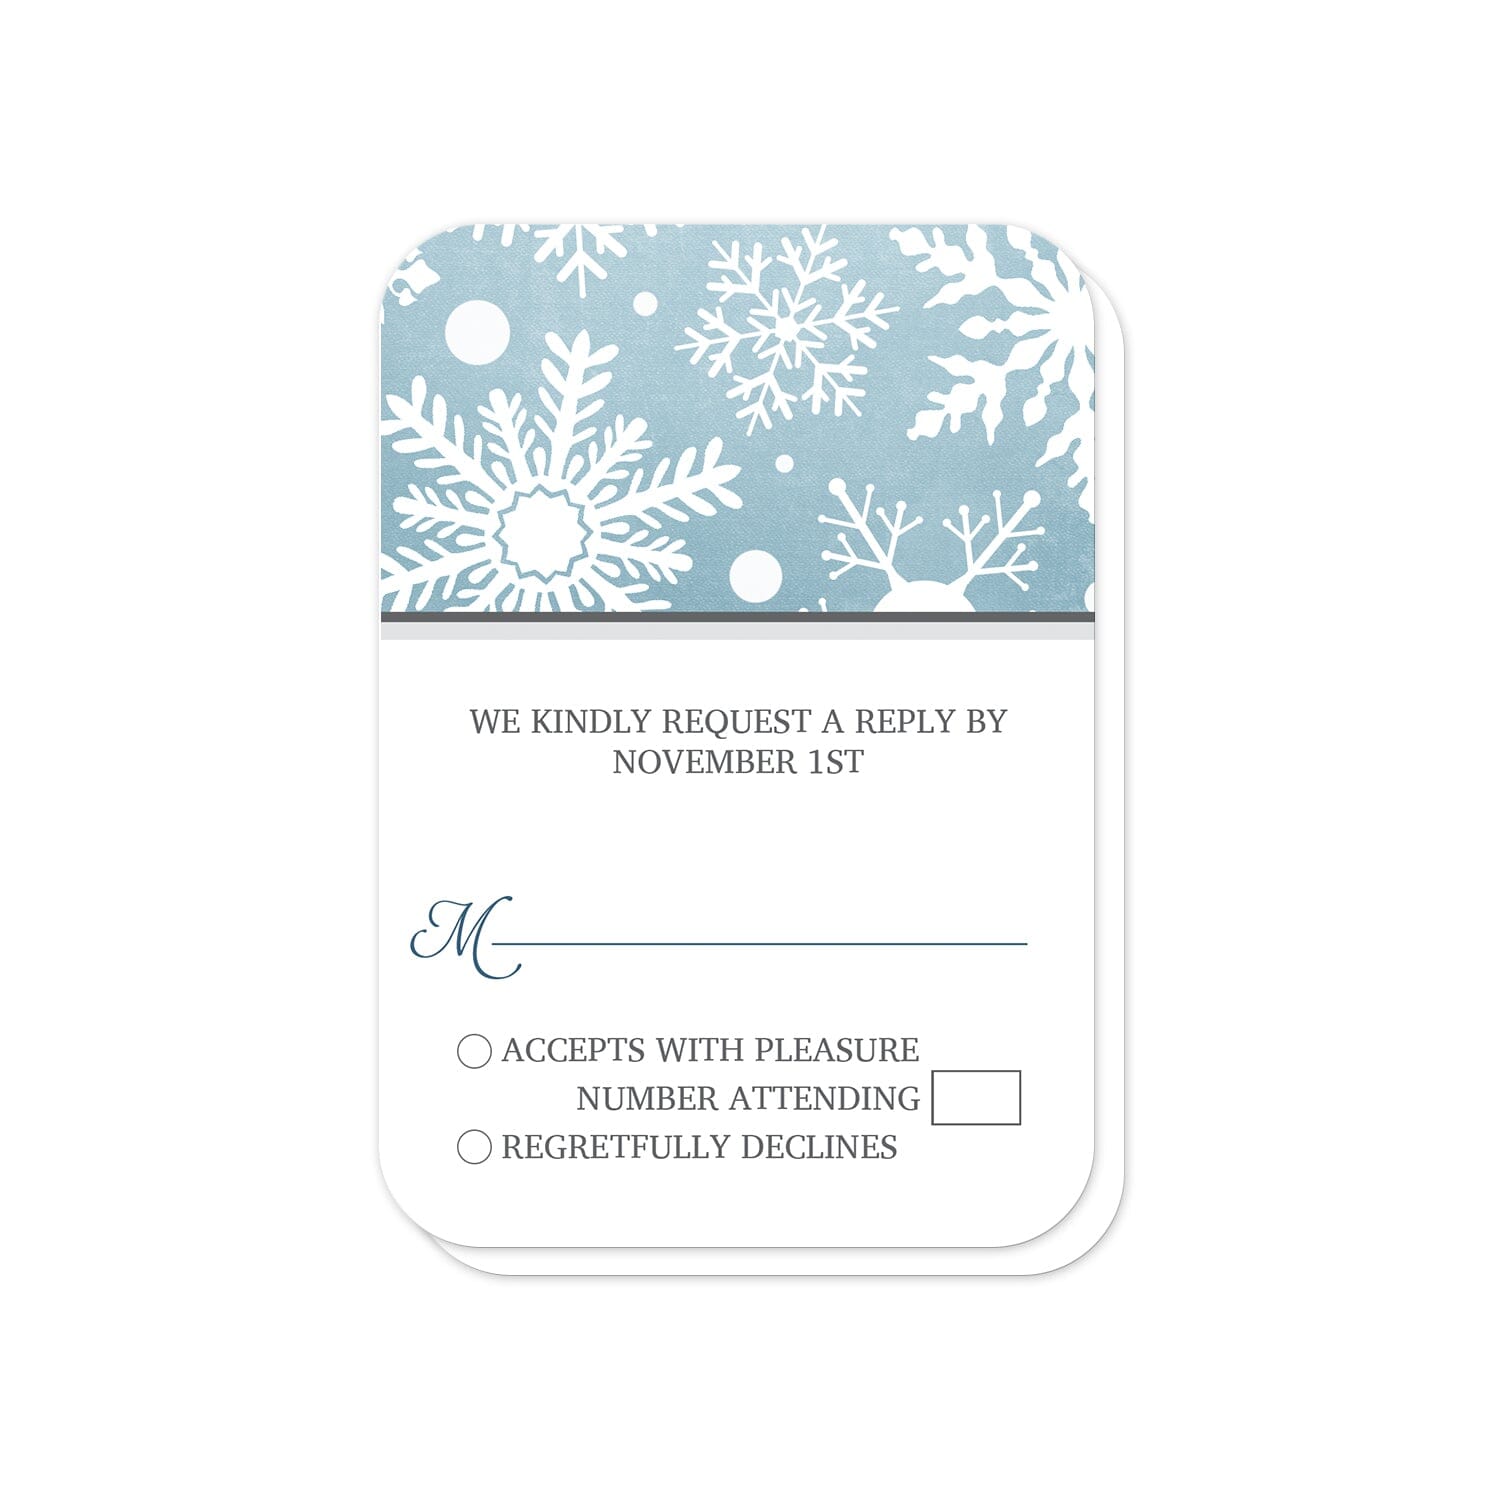 Winter Snowflake Blue with Gray RSVP Cards (with rounded corners) at Artistically Invited.